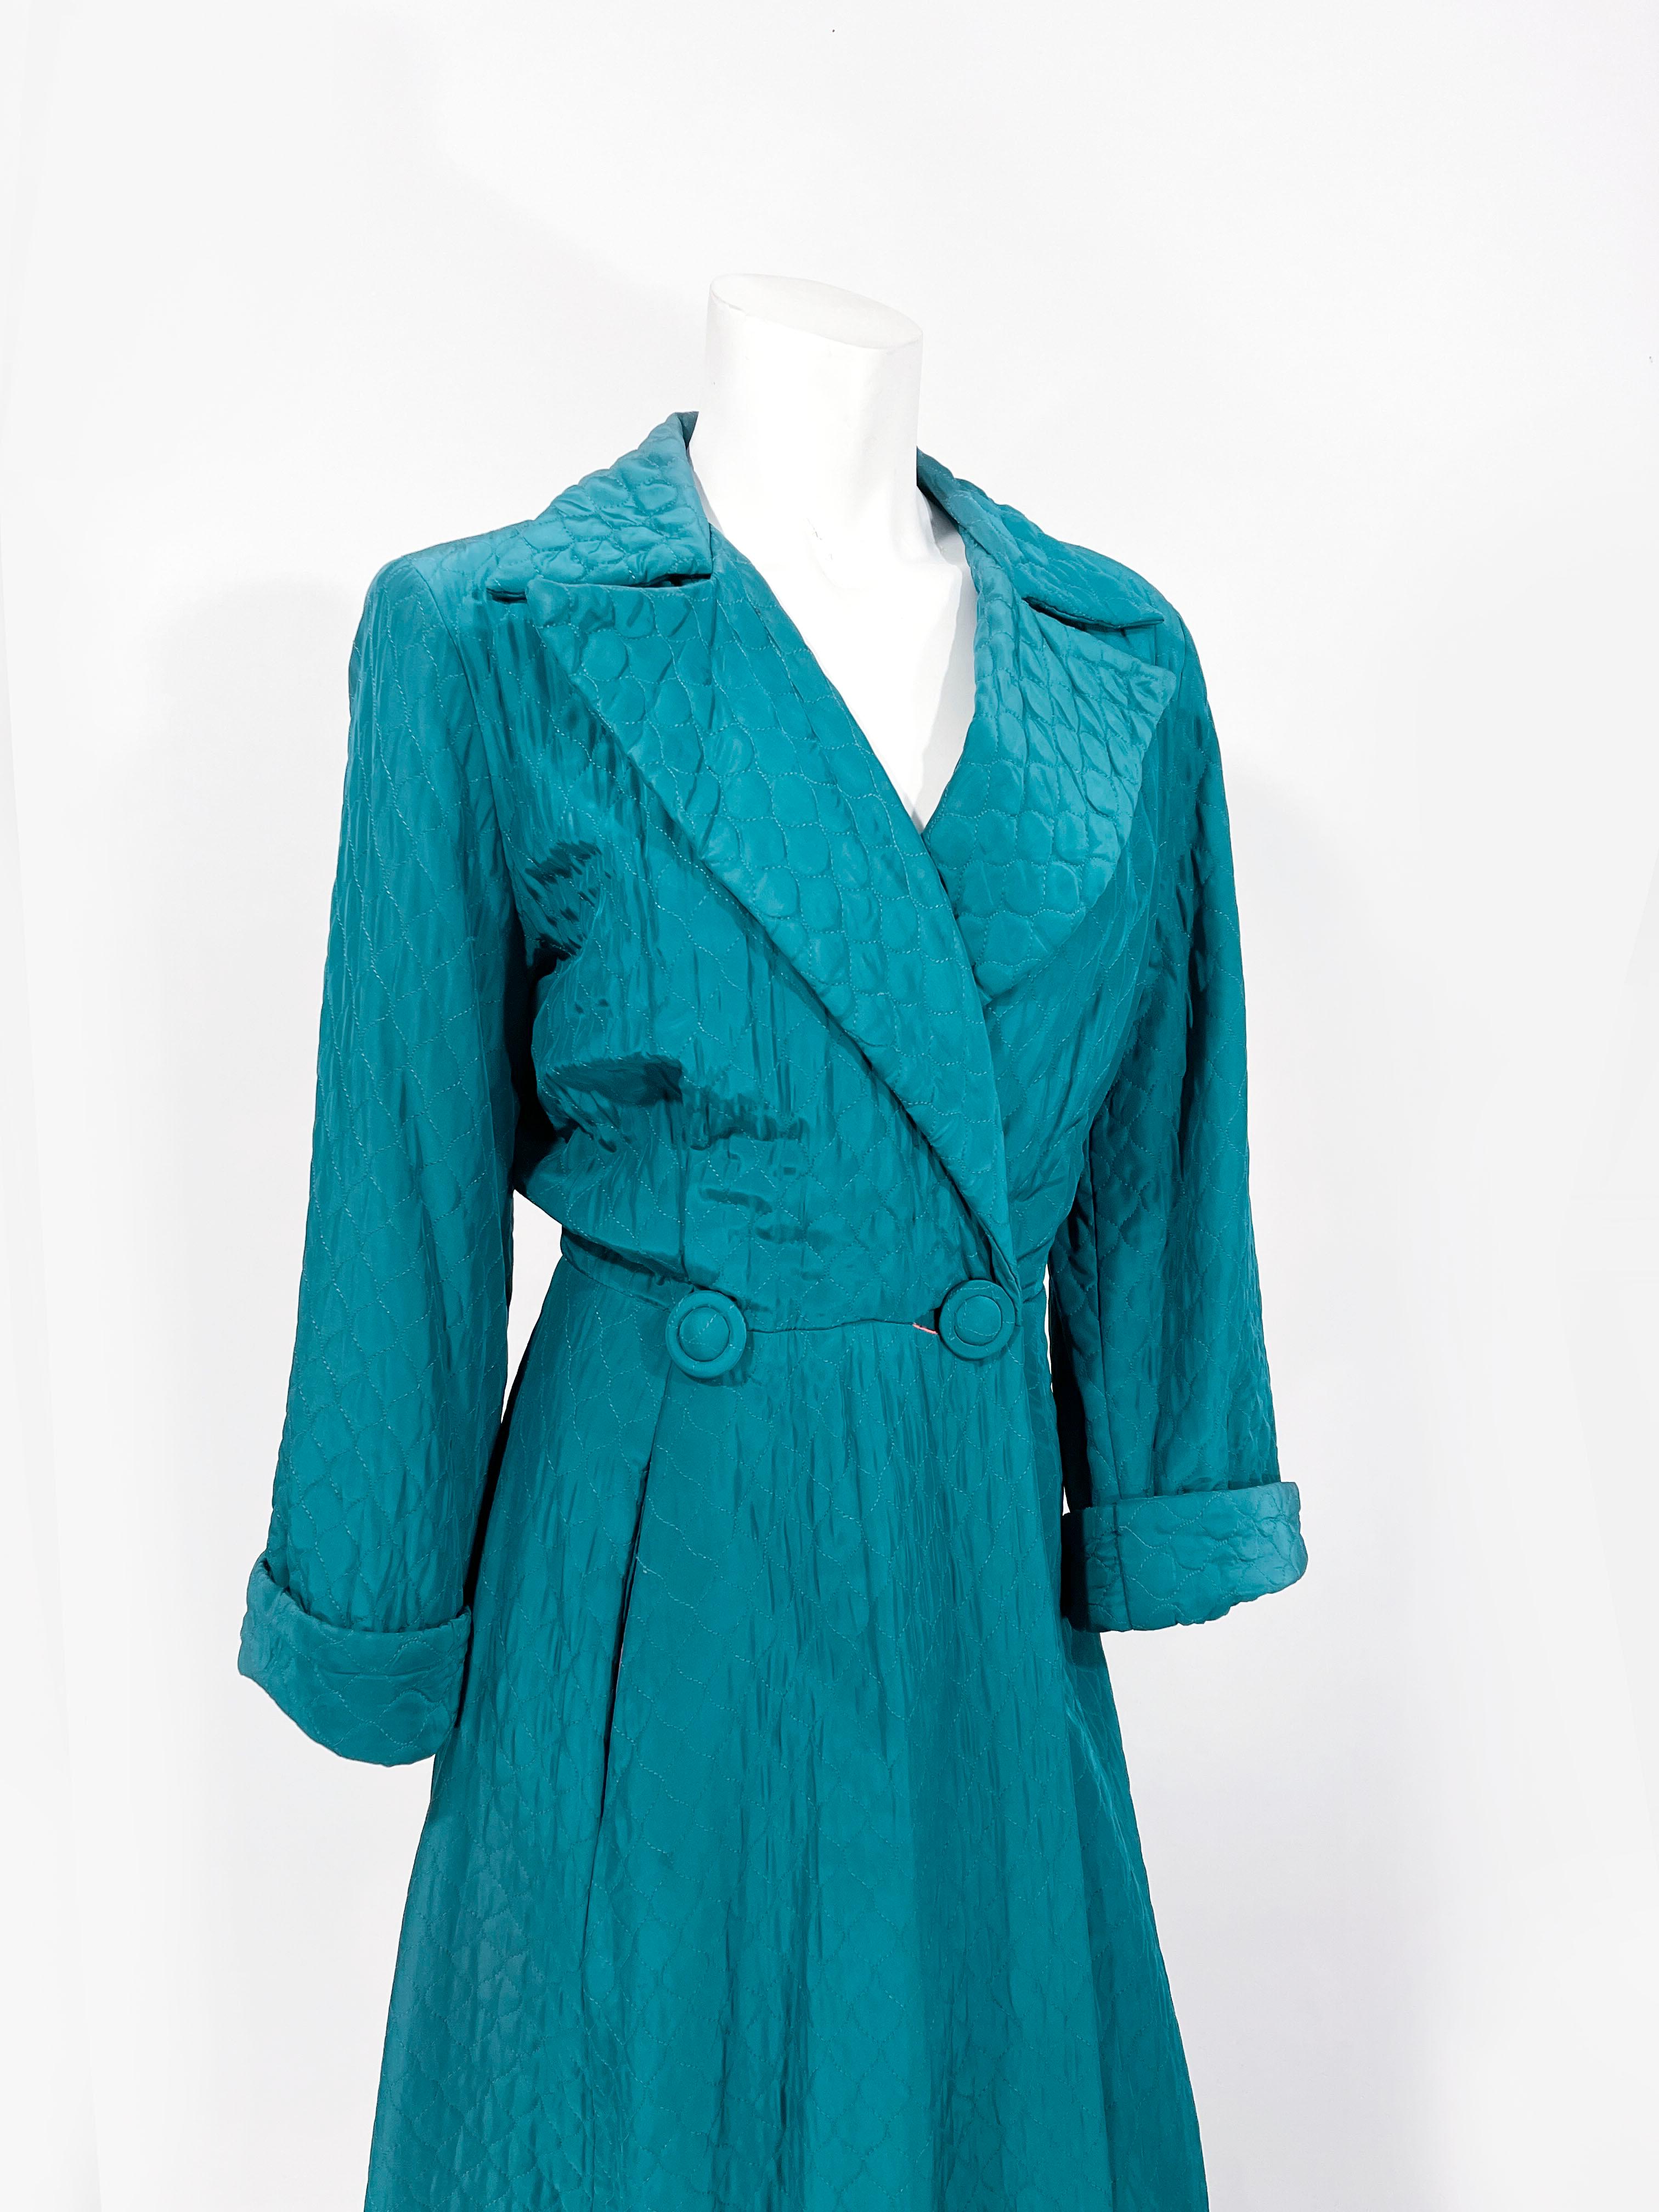 Late 1940s to early 1950s dark teal green quilted house robe/coat featuring a double button closure with designer covered buttons, a wide peak lapel, rolled and cuffed full length sleeves. The interior is fully lined with a rose salmon colored